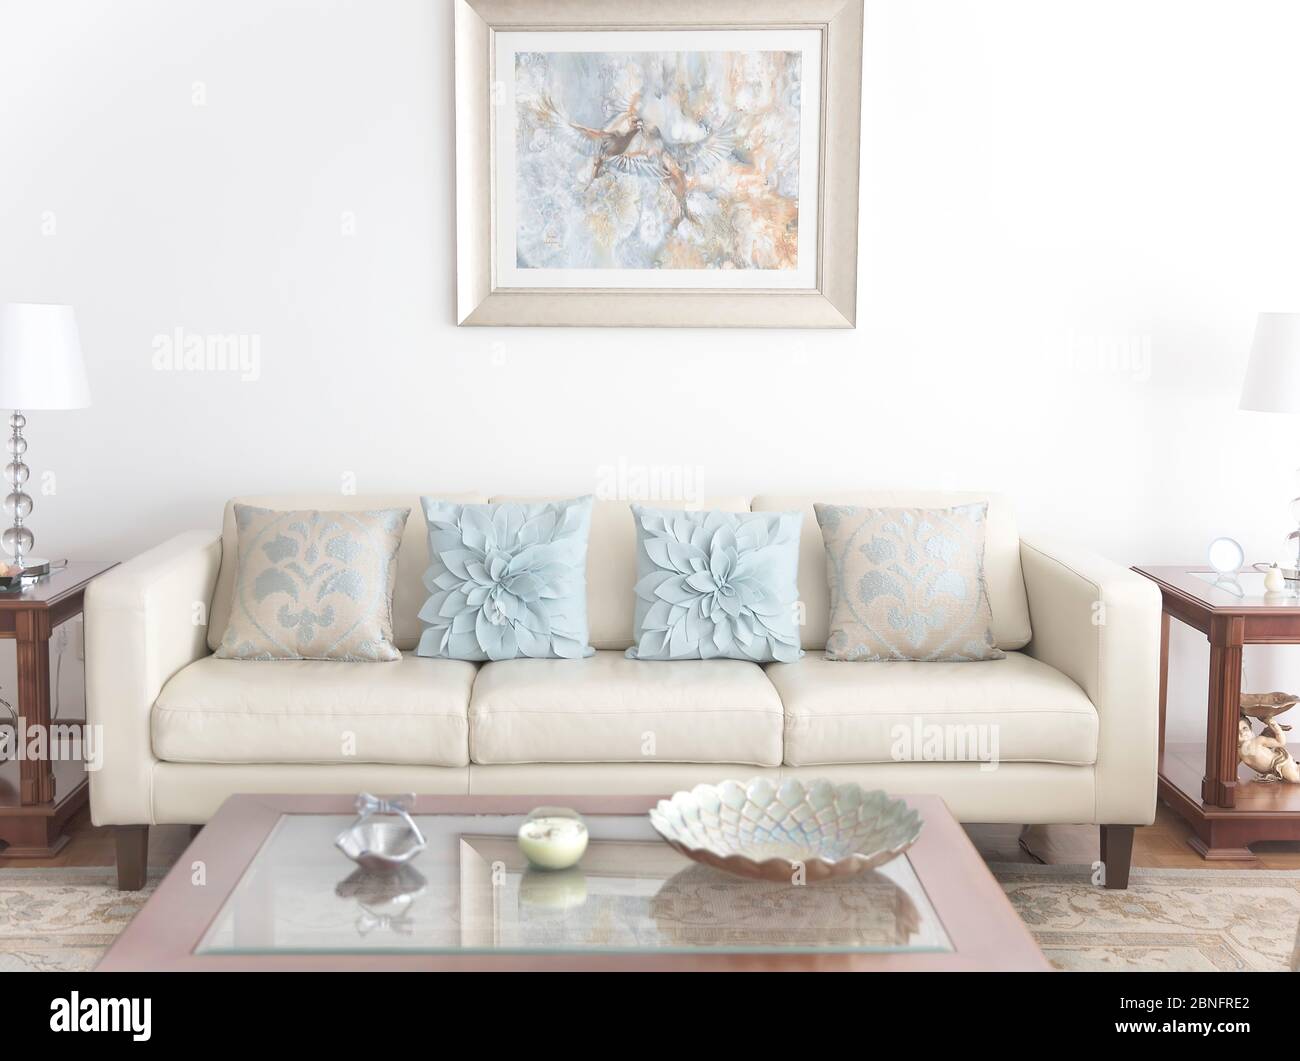 Living room with white sofa, coffee table and painting on wall Stock Photo